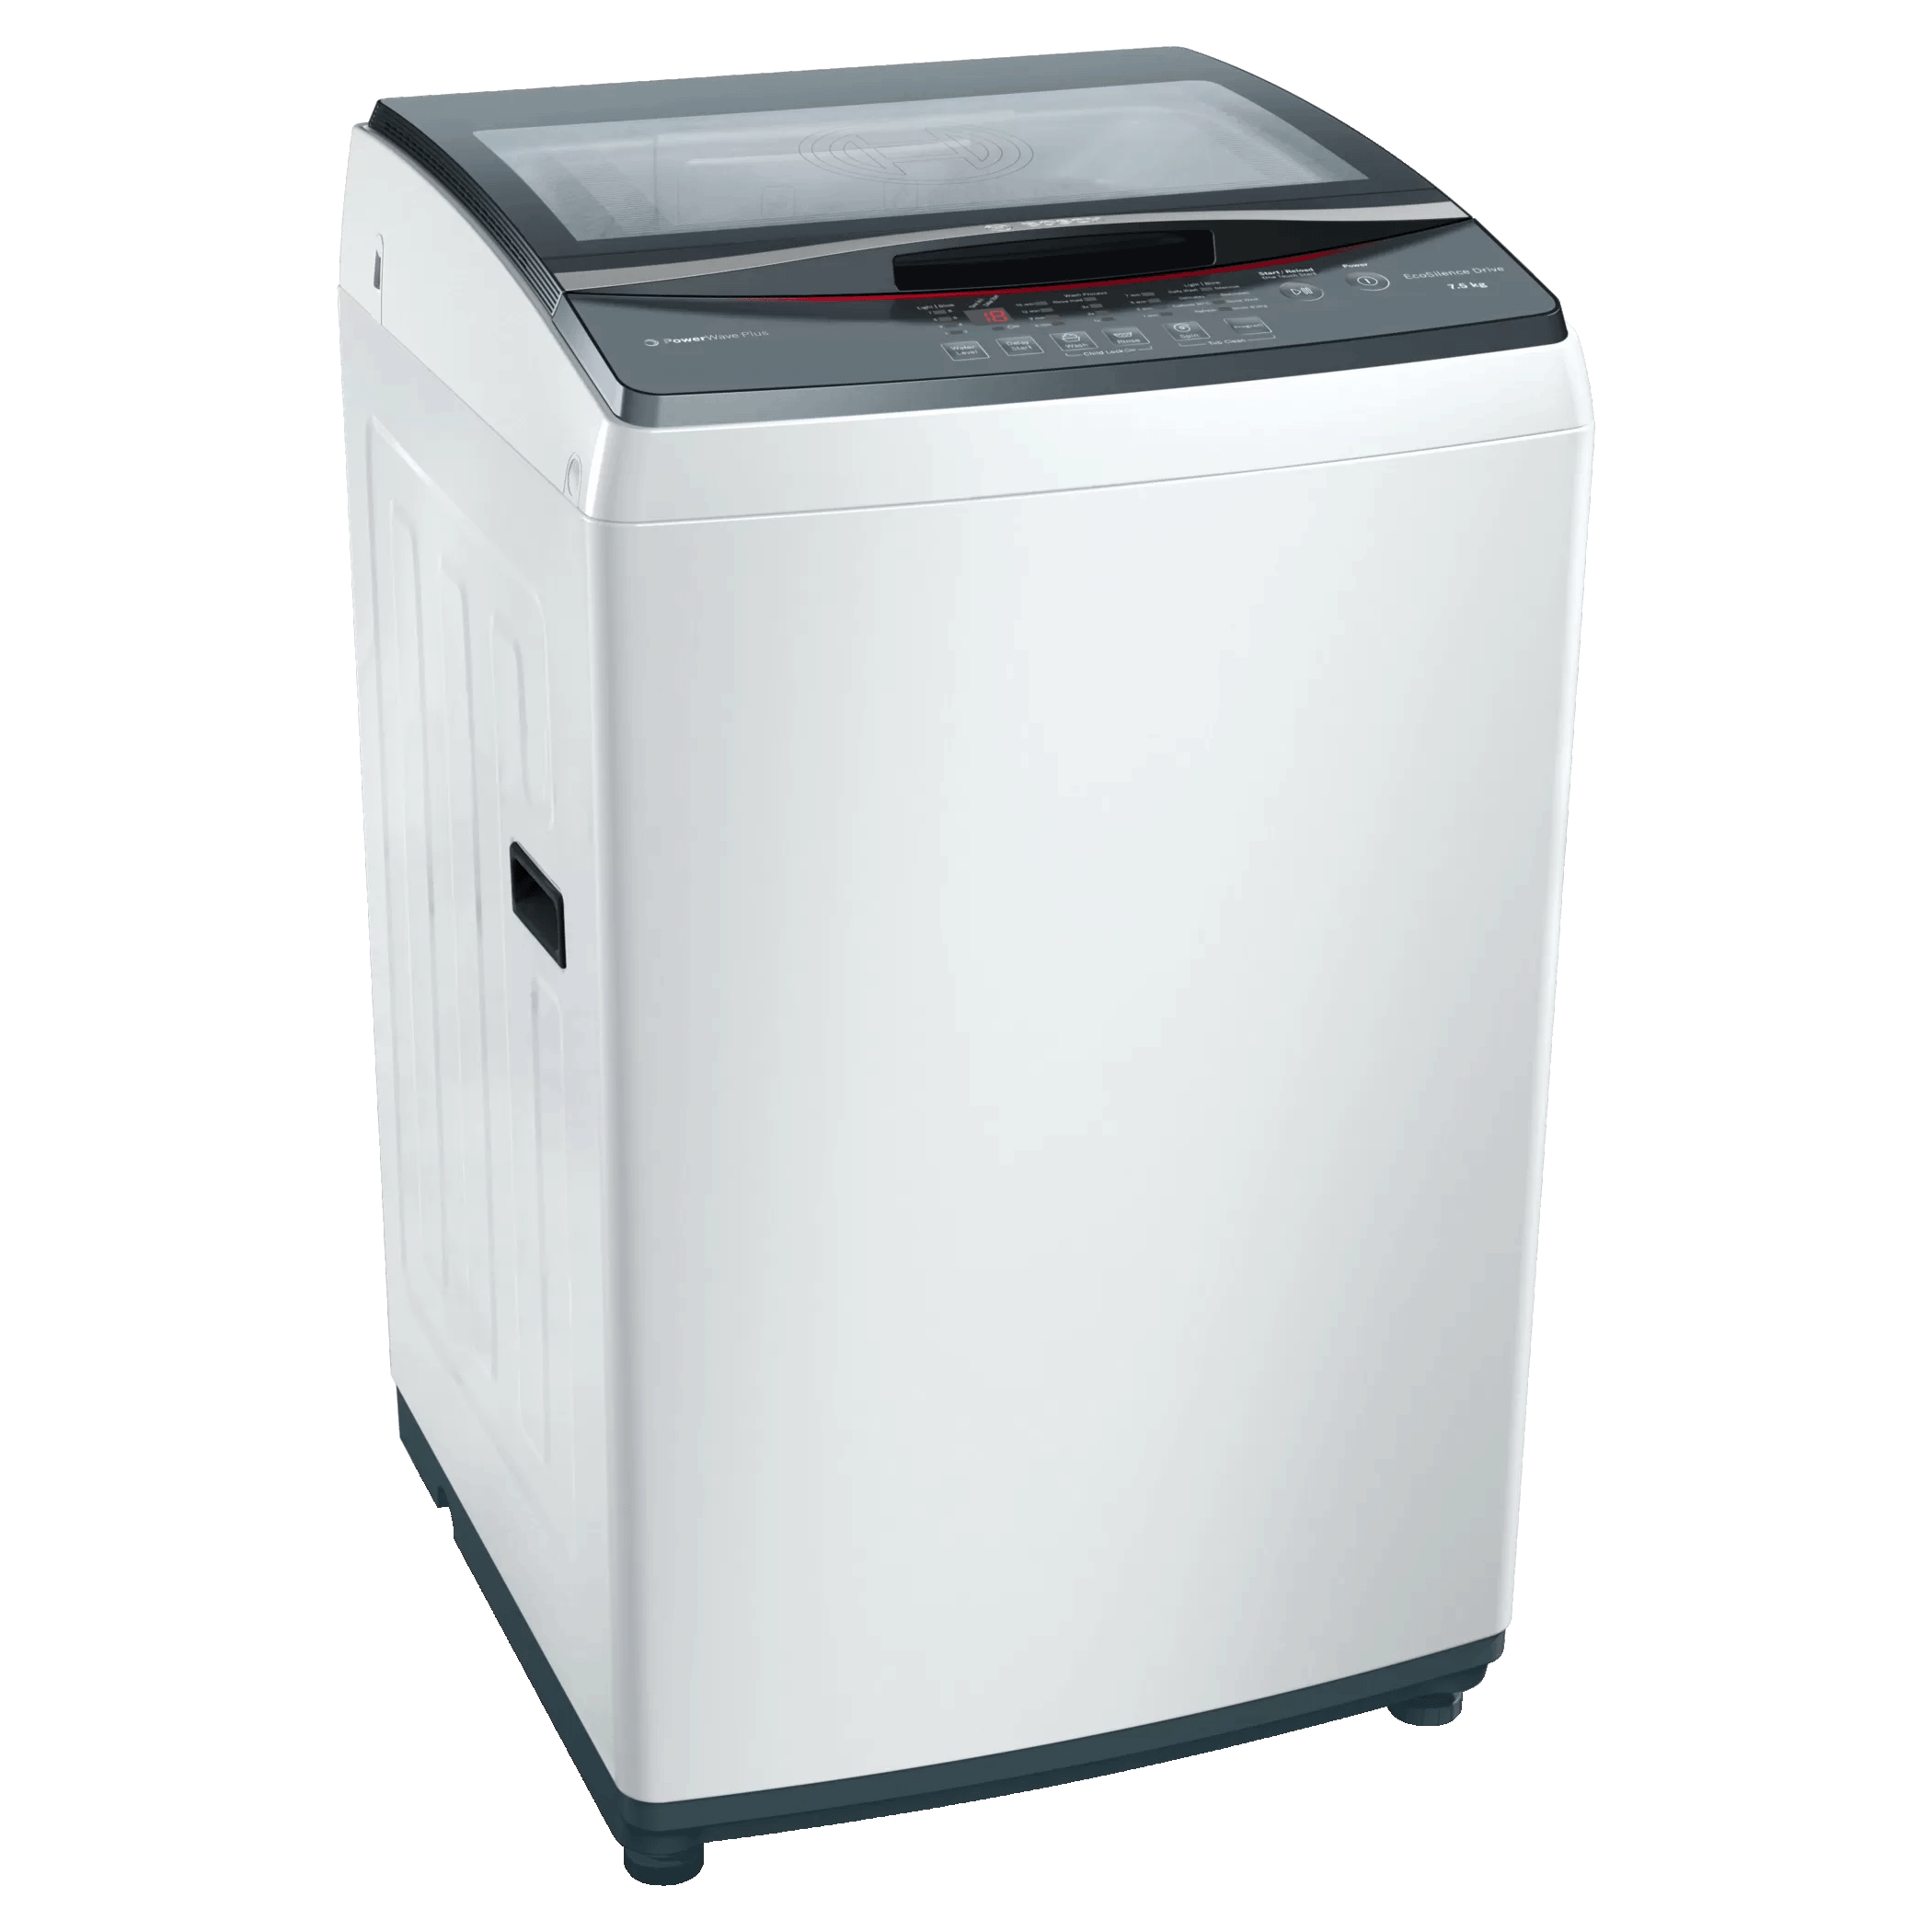 Bosch Serie 4 7.5 kg Fully Automatic Top Load Washing Machine (WOE754W2IN, White)_1